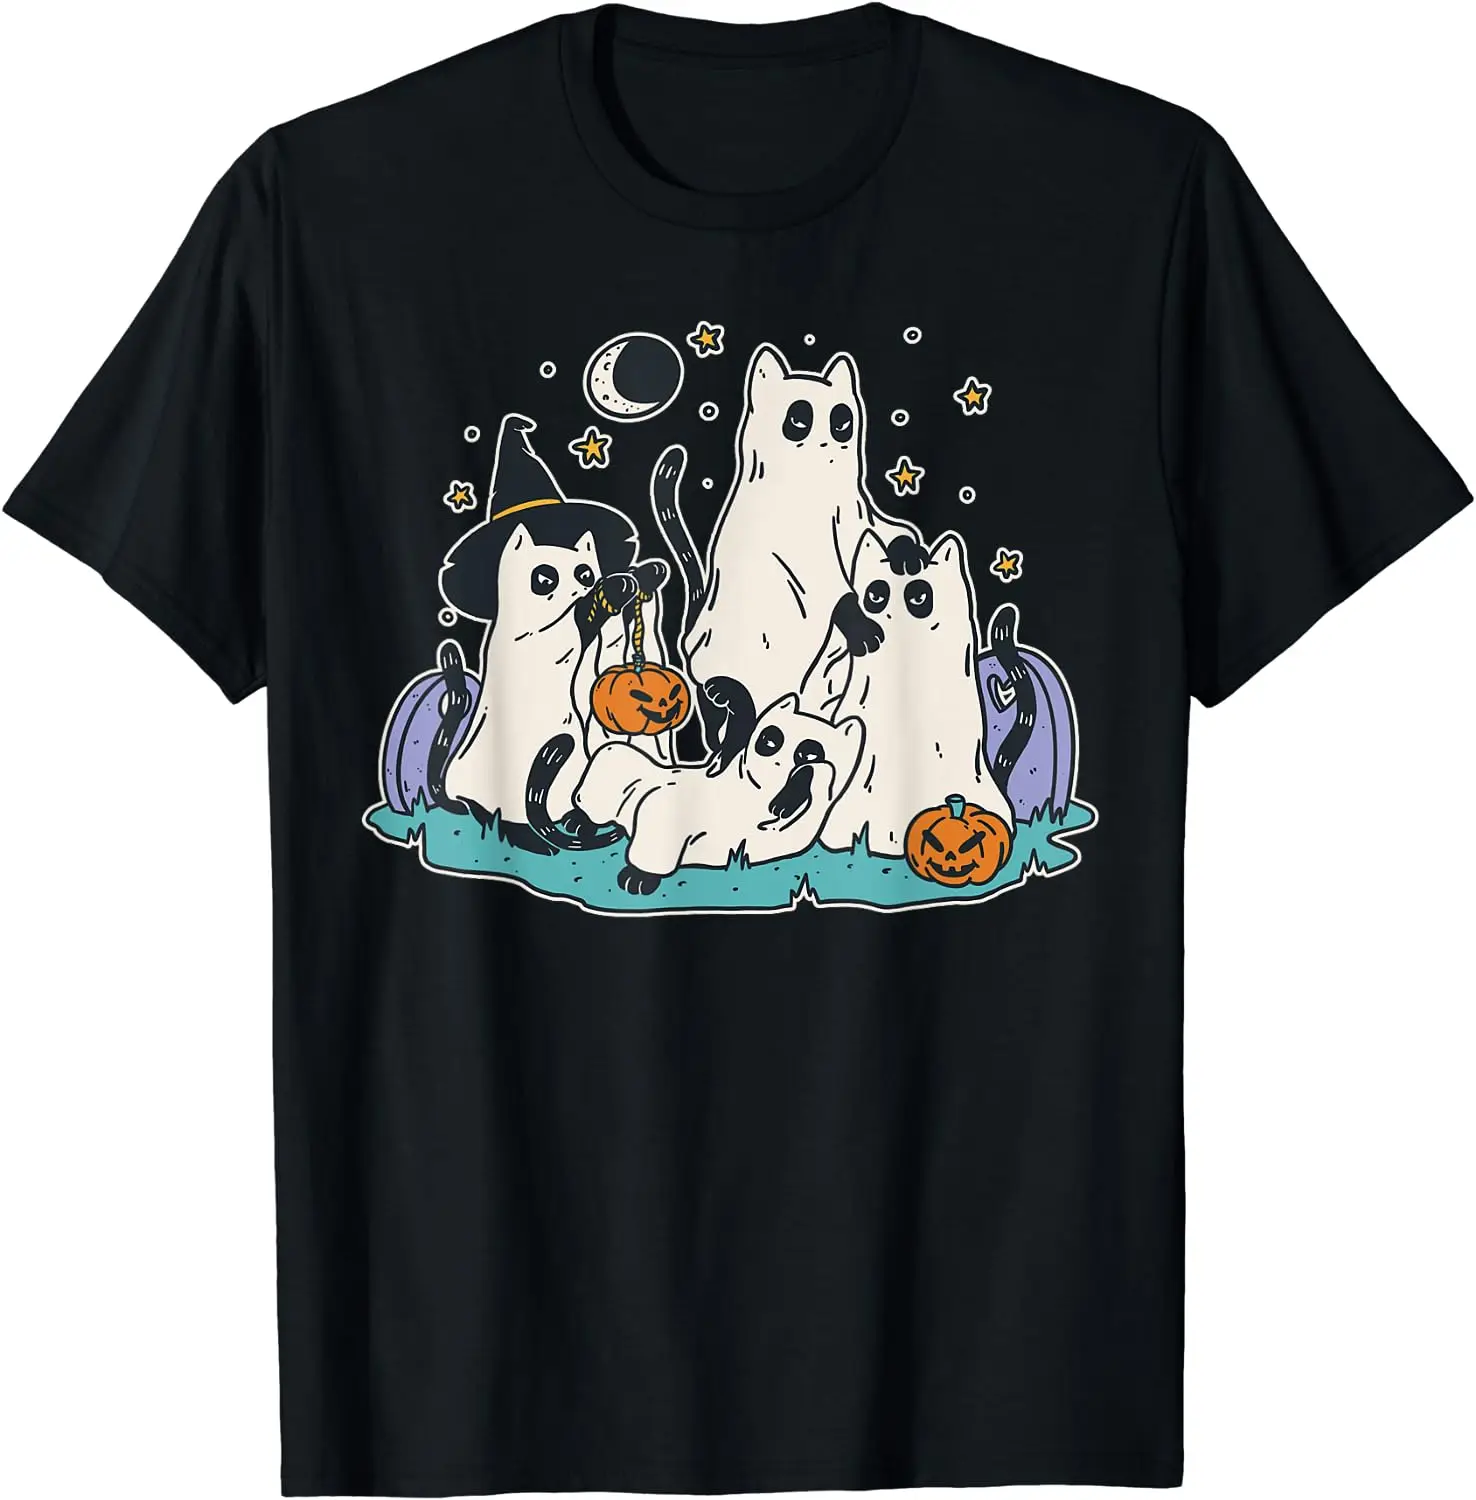 

Black Cats in Ghost Costume Cute Women and Men Halloween T-Shirt for Men Women Kids Casual Cotton Daily Four Seasons Tees